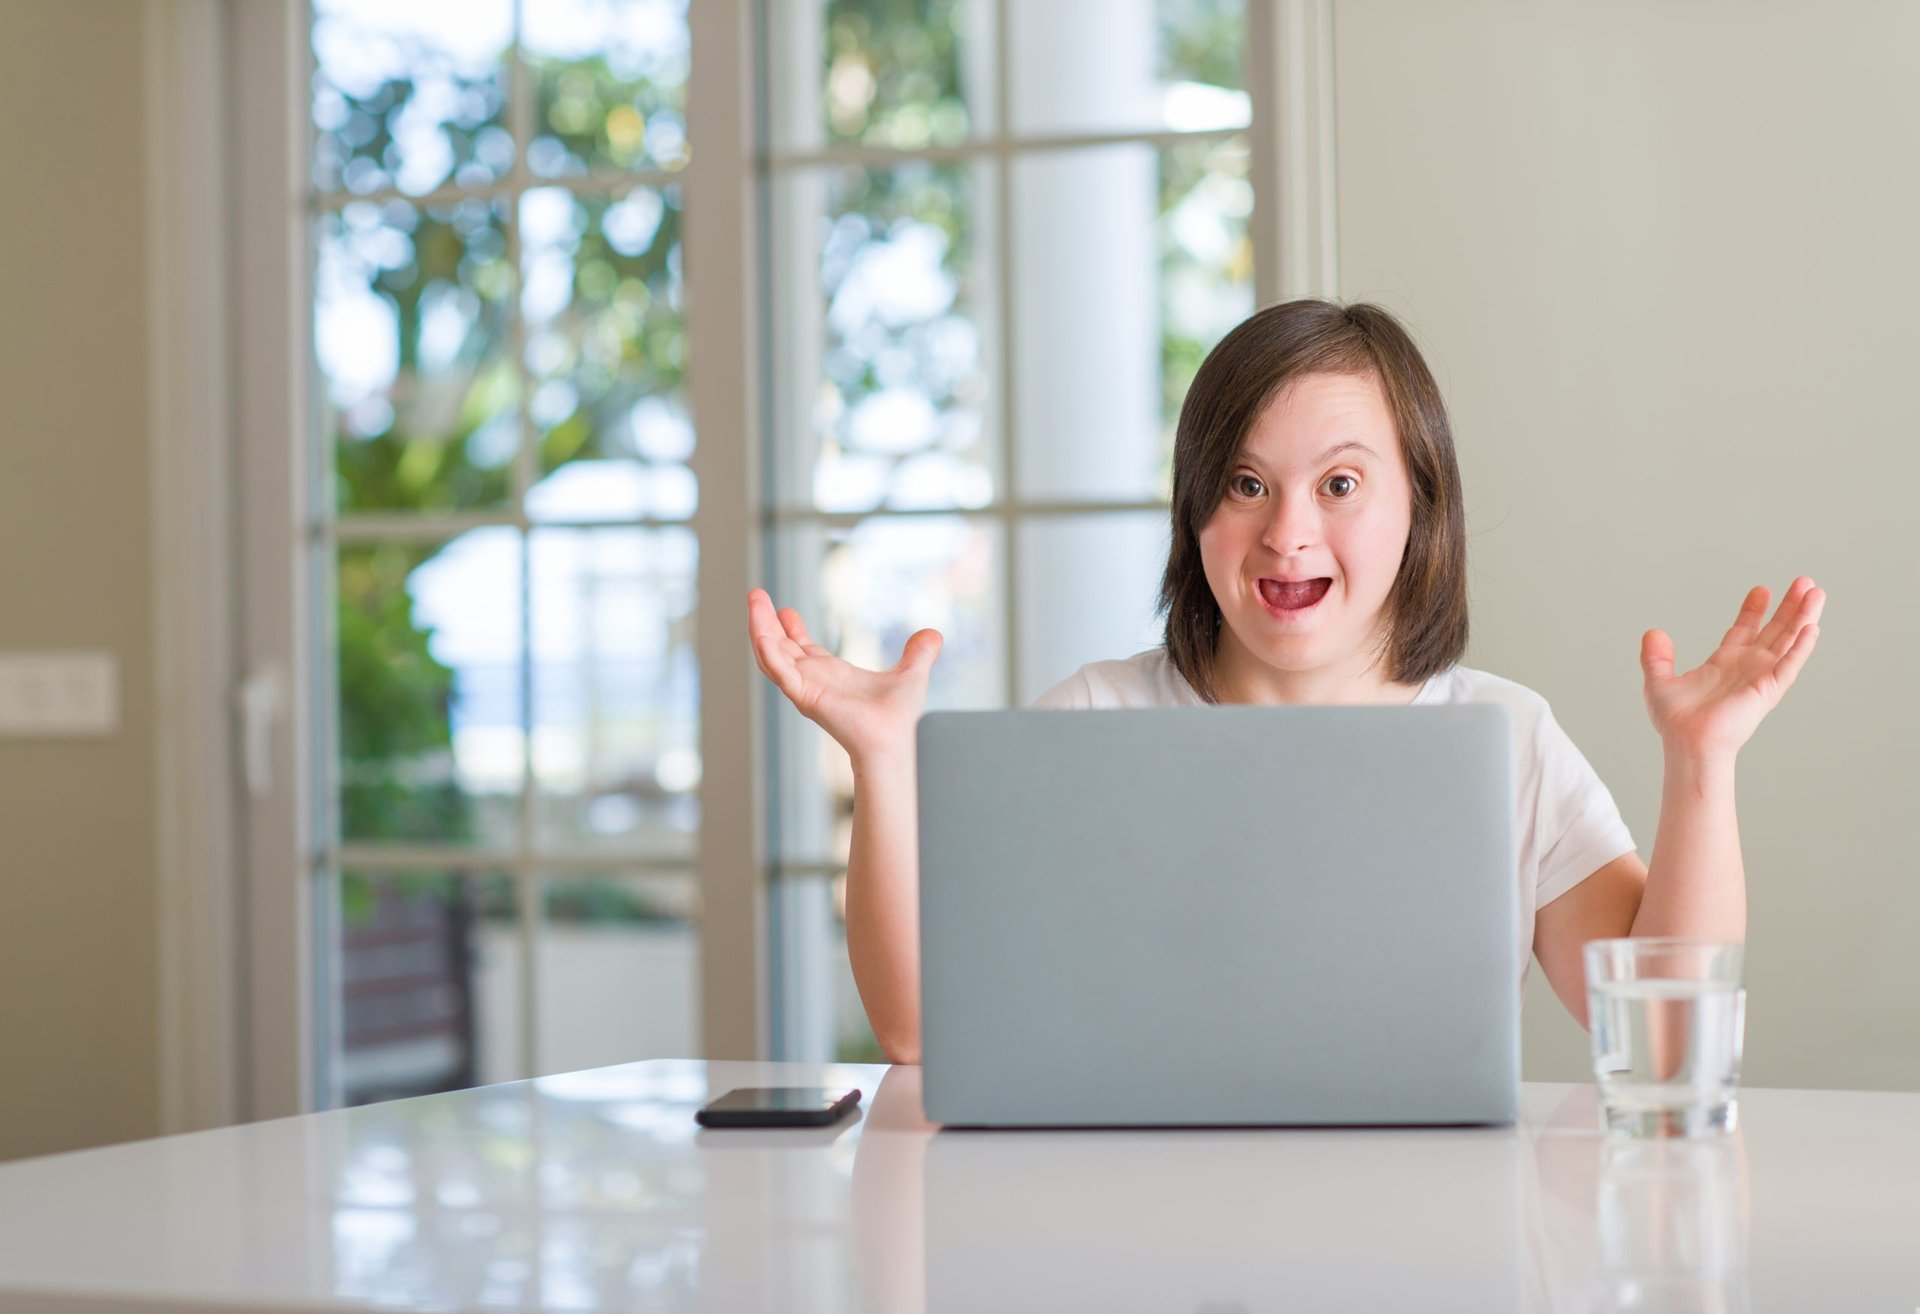 Excited woman on a laptop